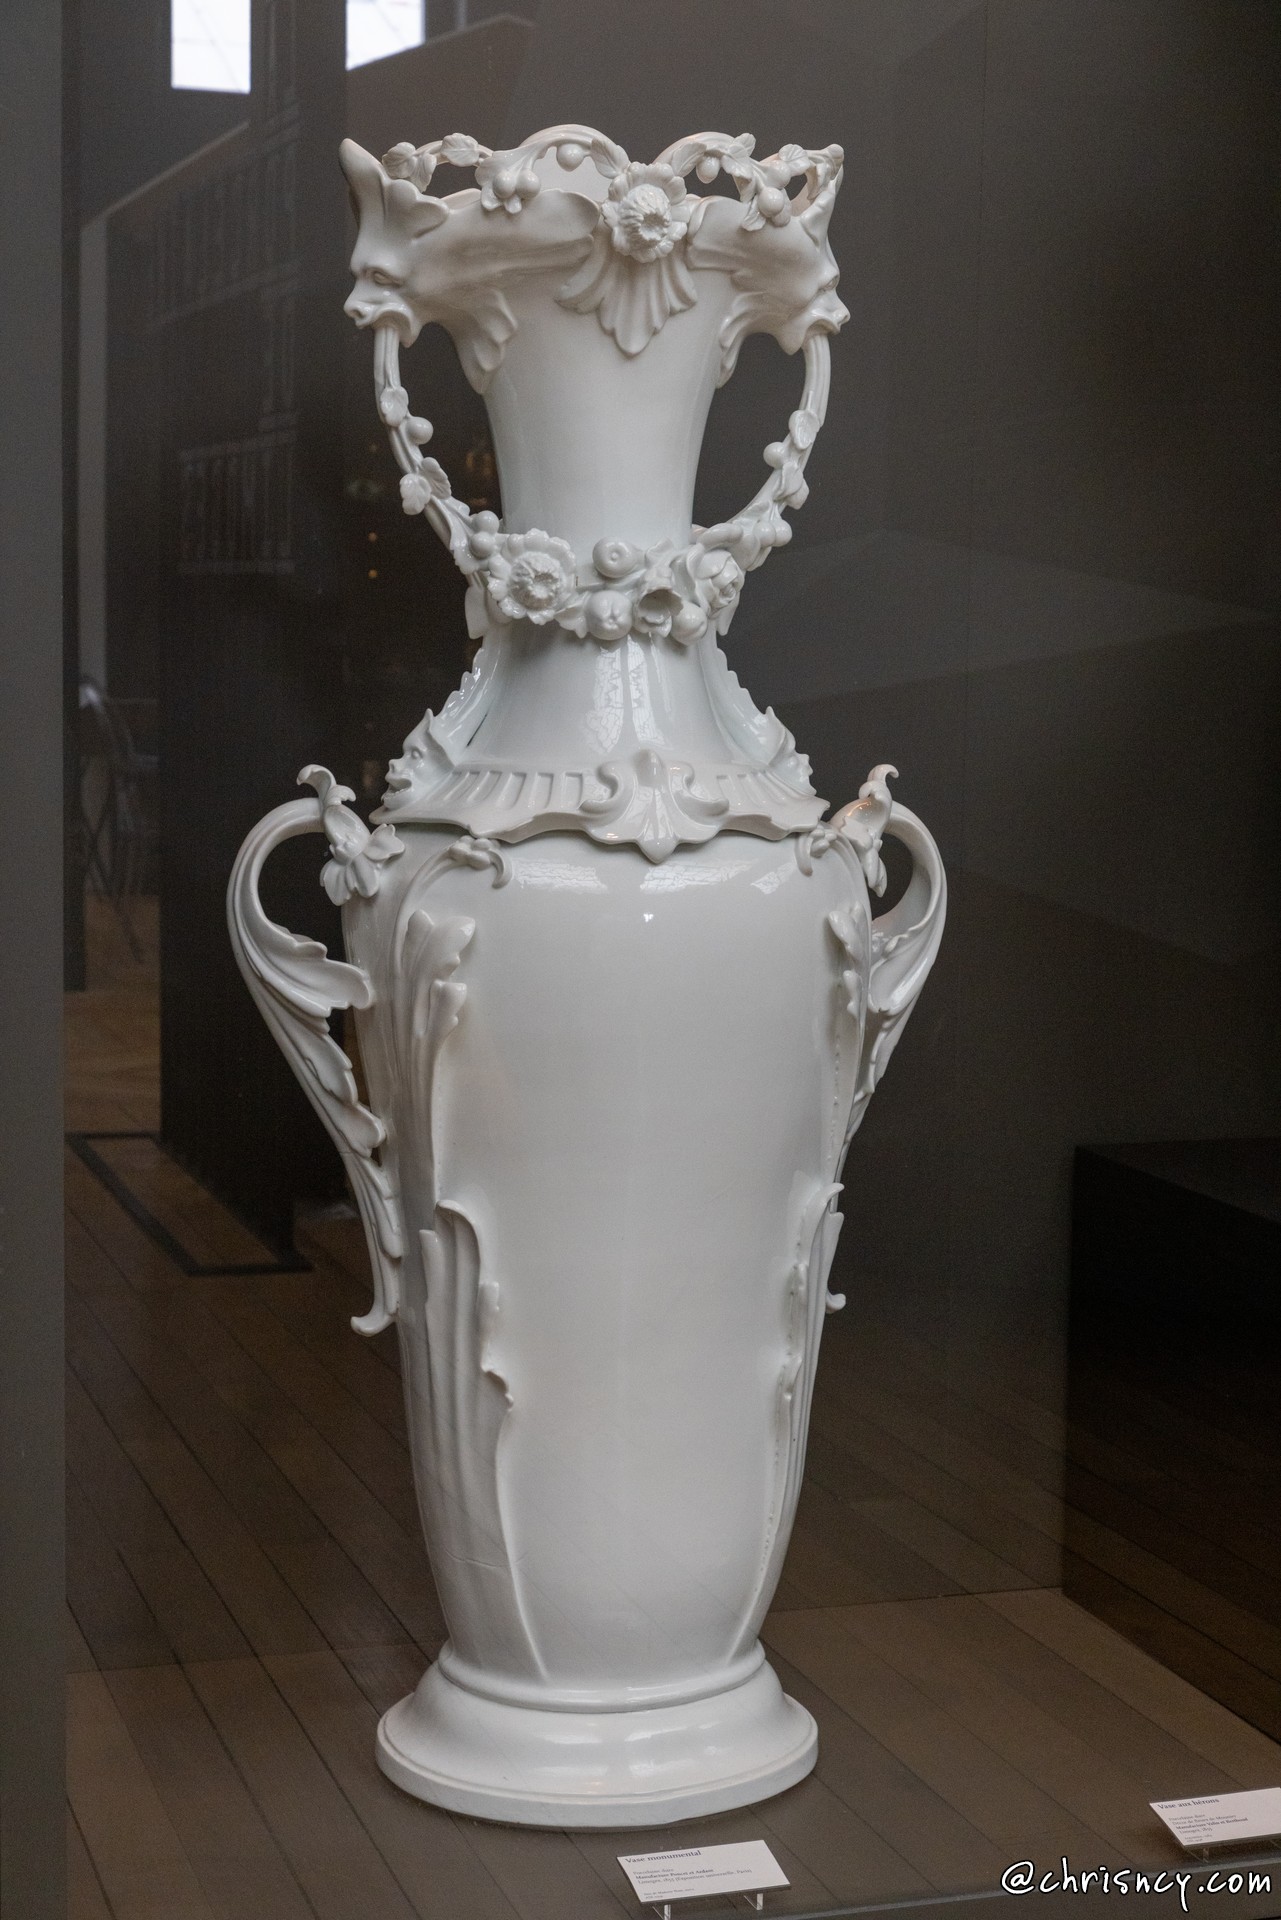 20240424-1349-Limoges_musee_dubouche_porcelaine.jpg